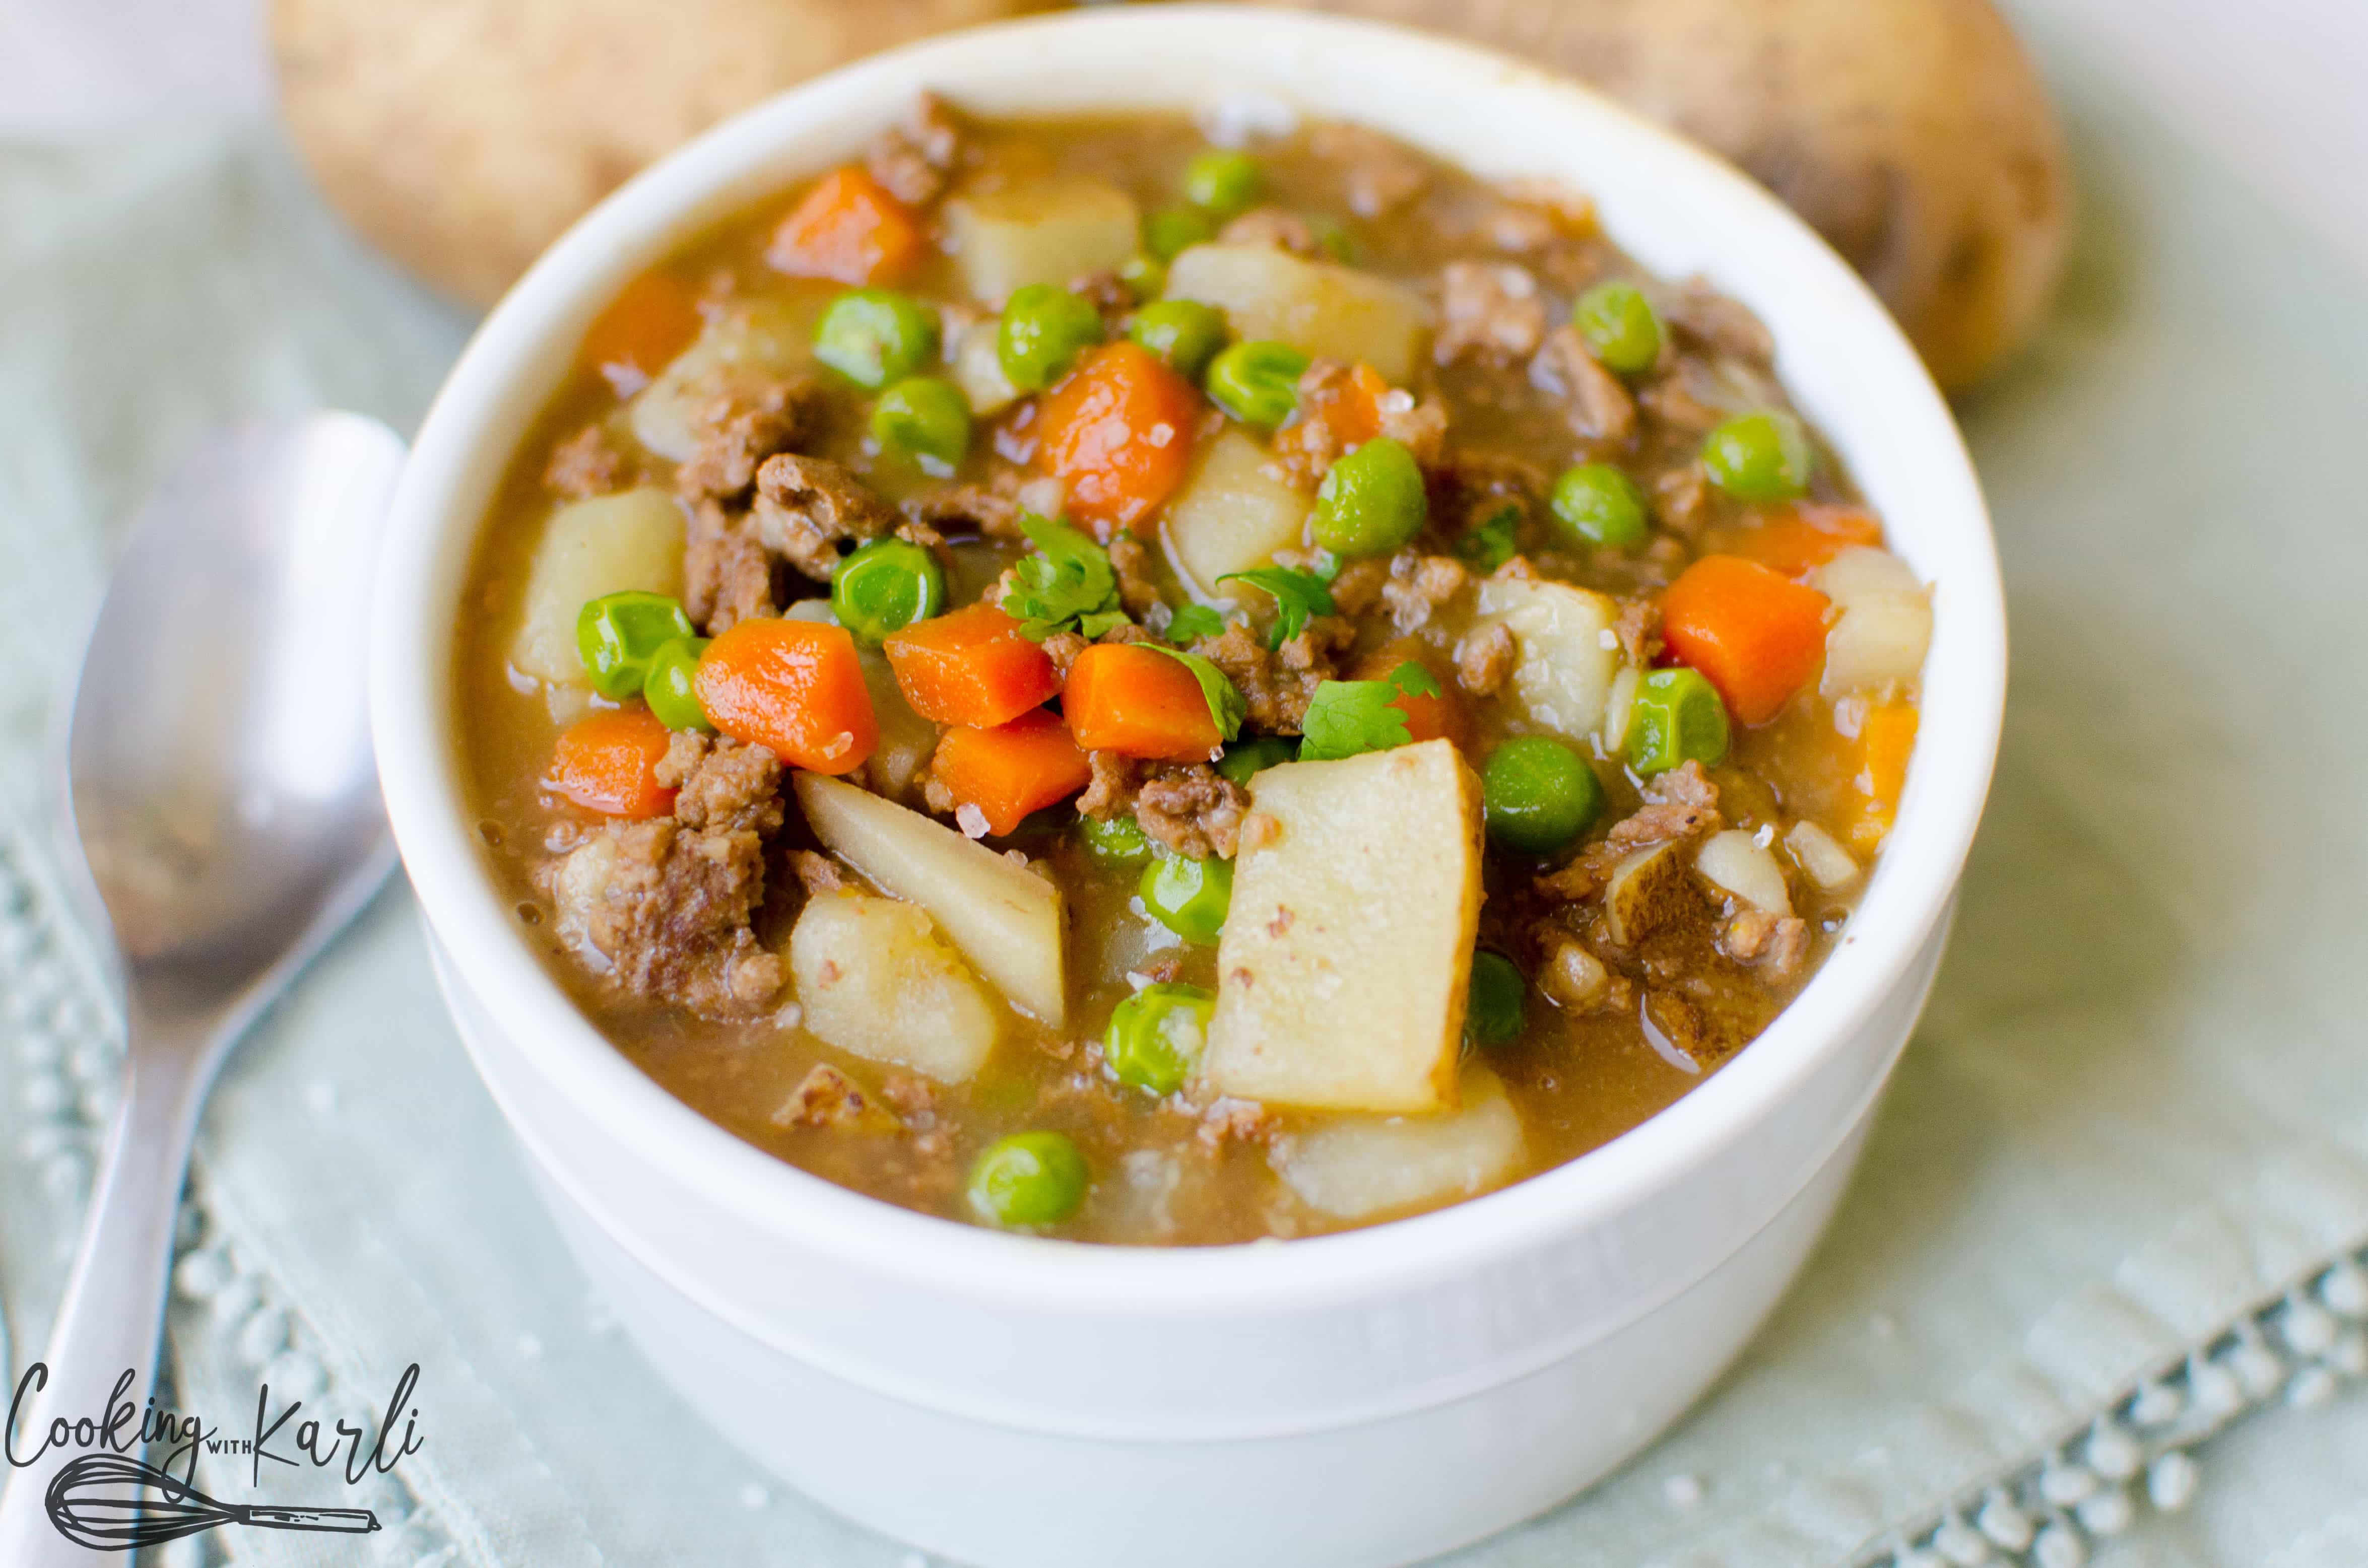 Poor man's soup or stew is a cheap and easy meal for those on a budget.